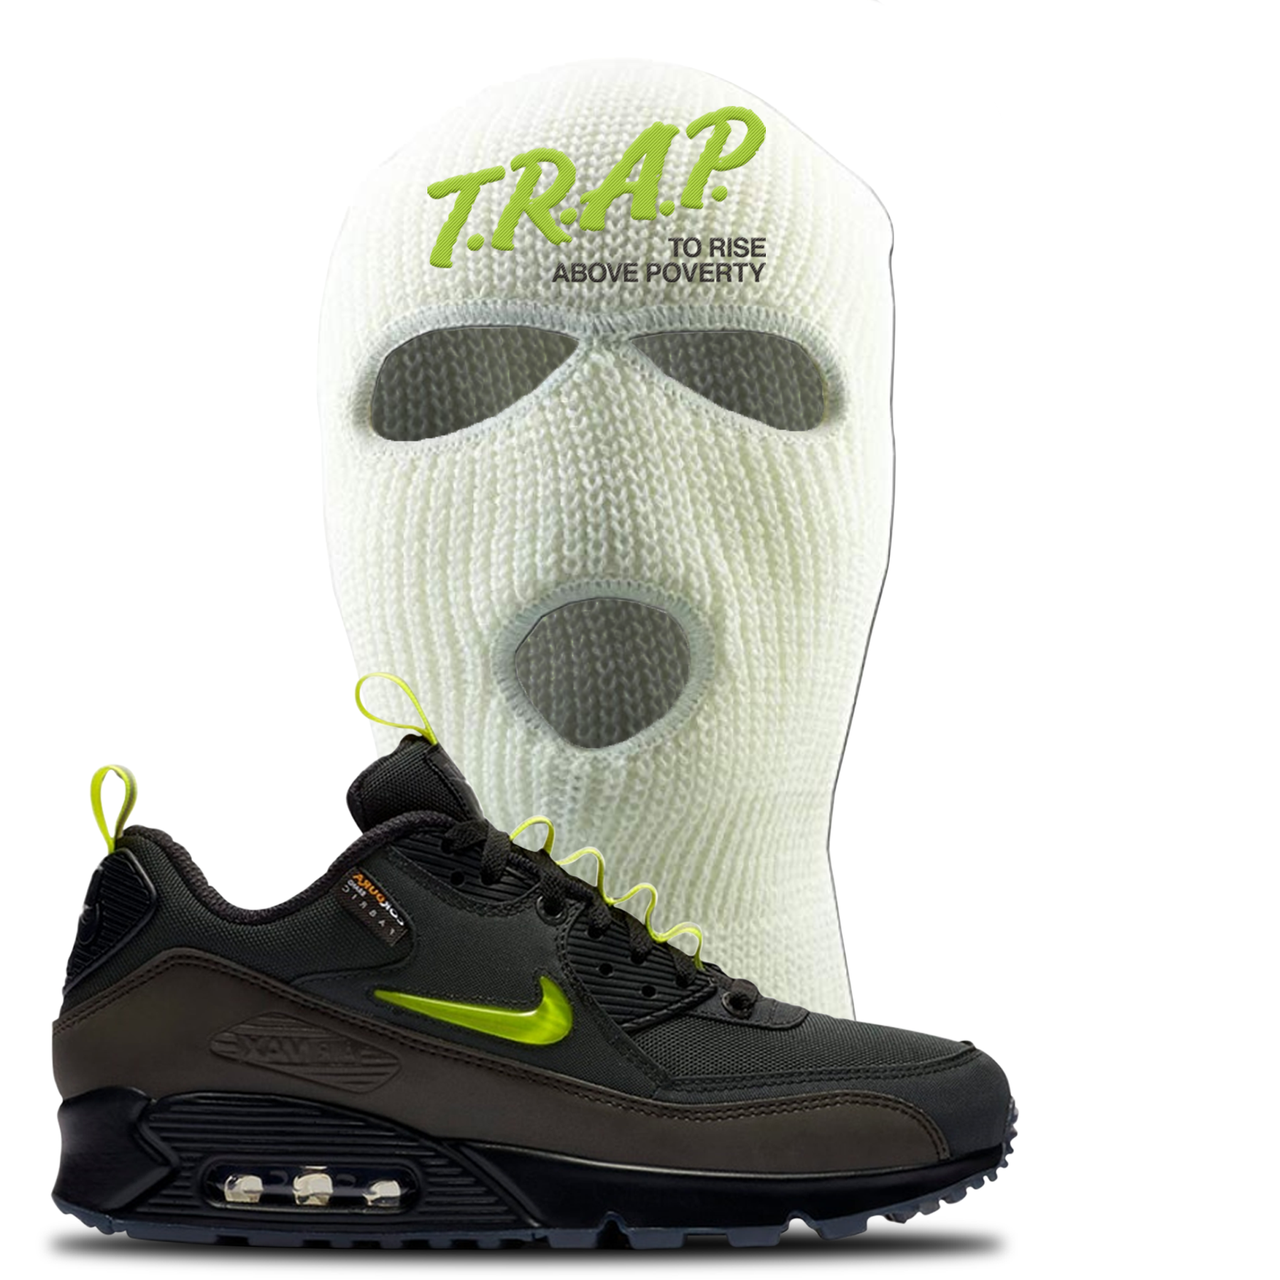 The Basement X Air Max 90 Manchester Trap to Rise Above Poverty White Sneaker Hook Up Ski Mask